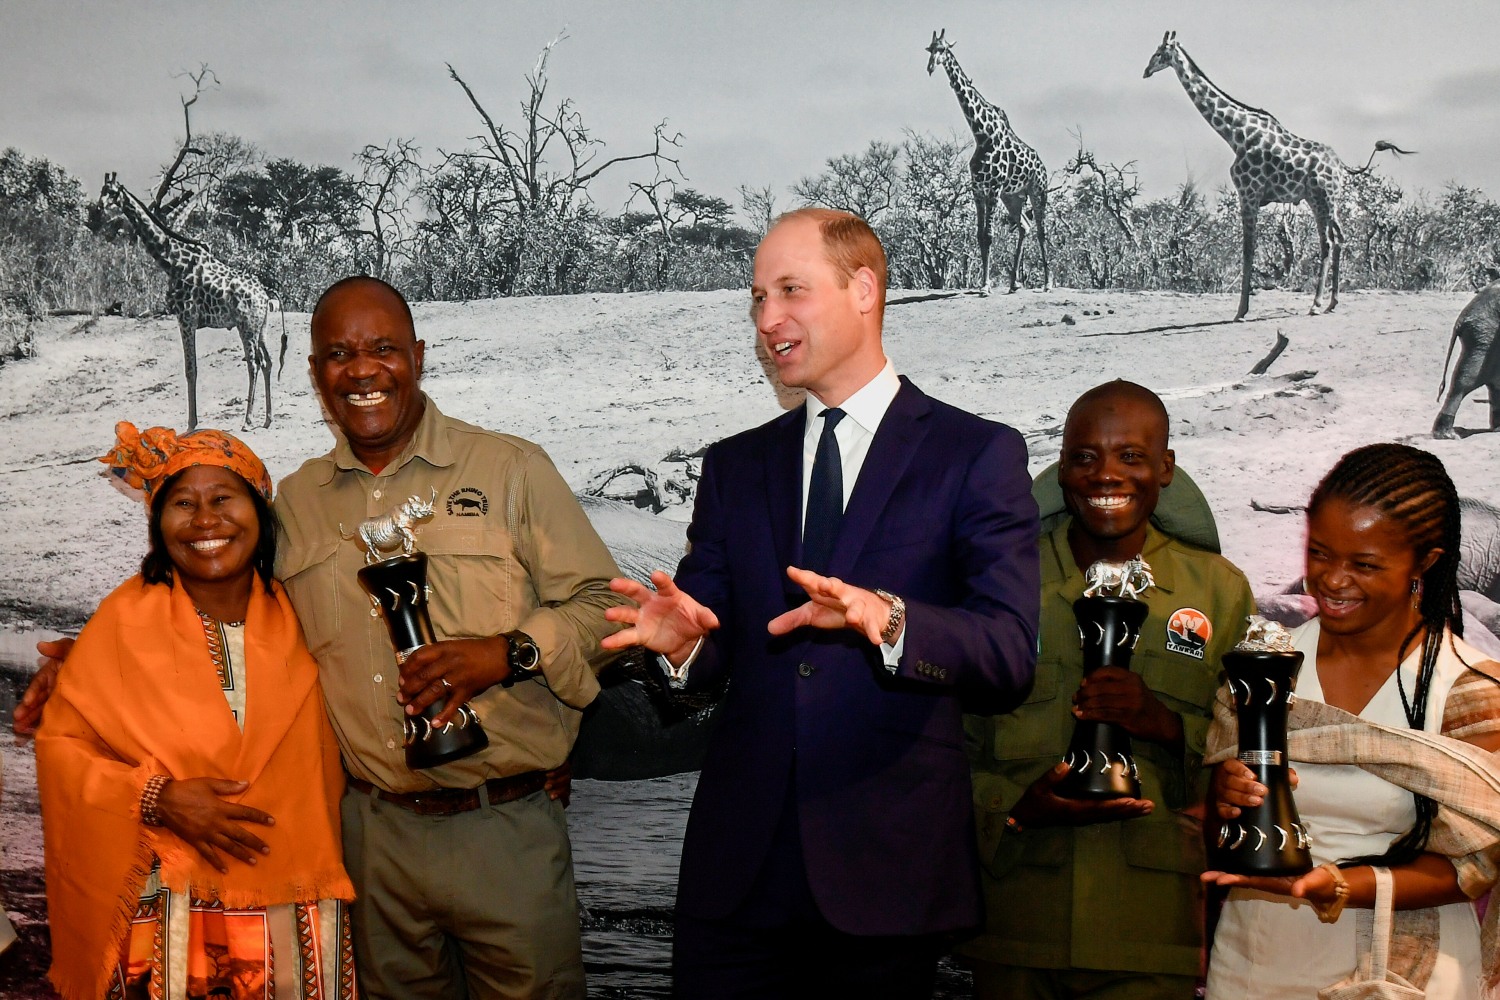 Tusk Conservation Awards in London